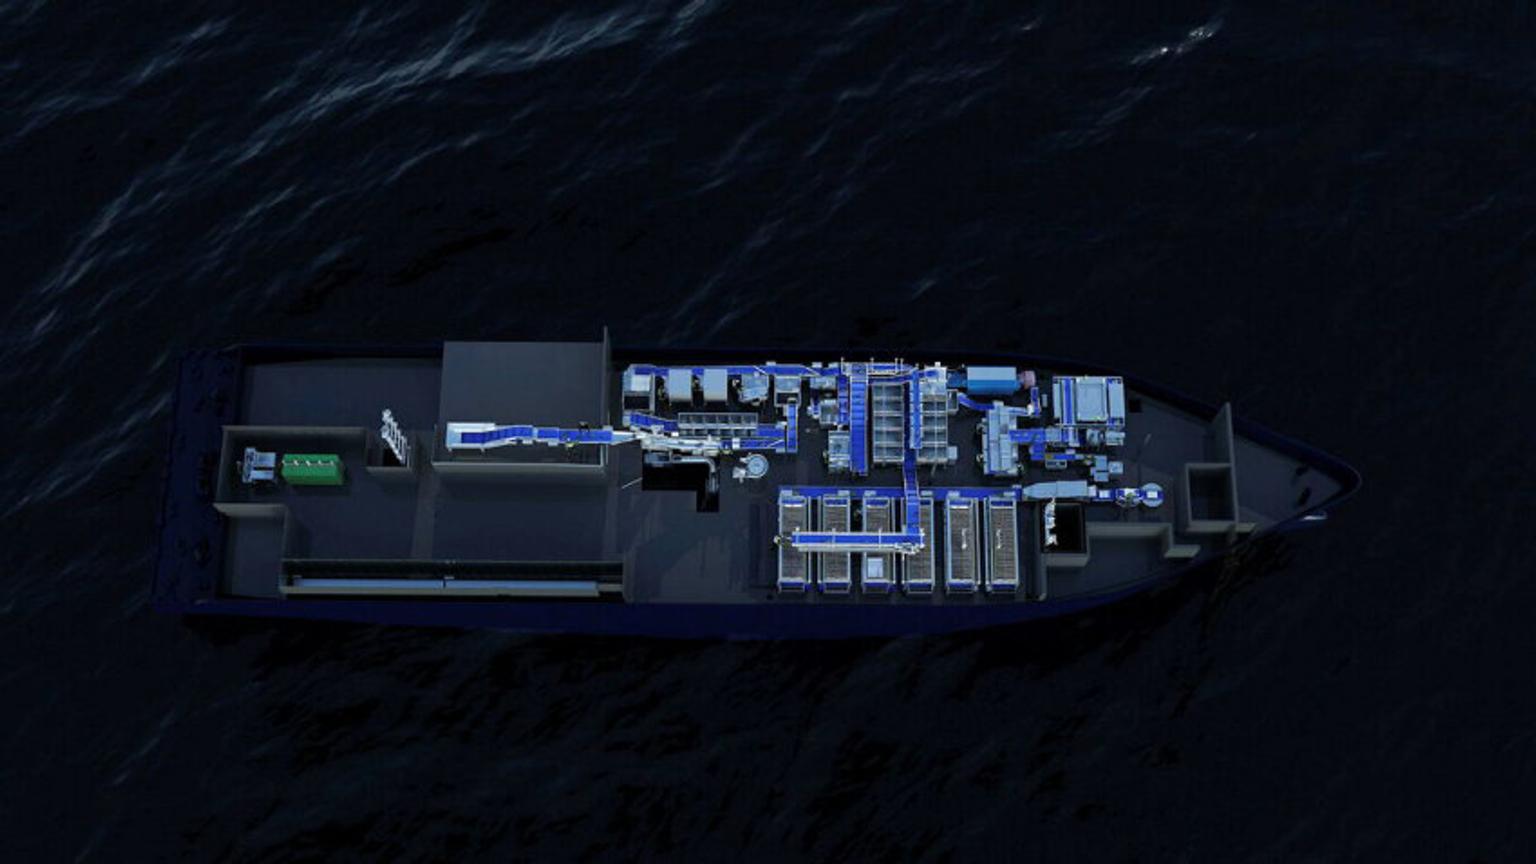 Digital model of ship from above